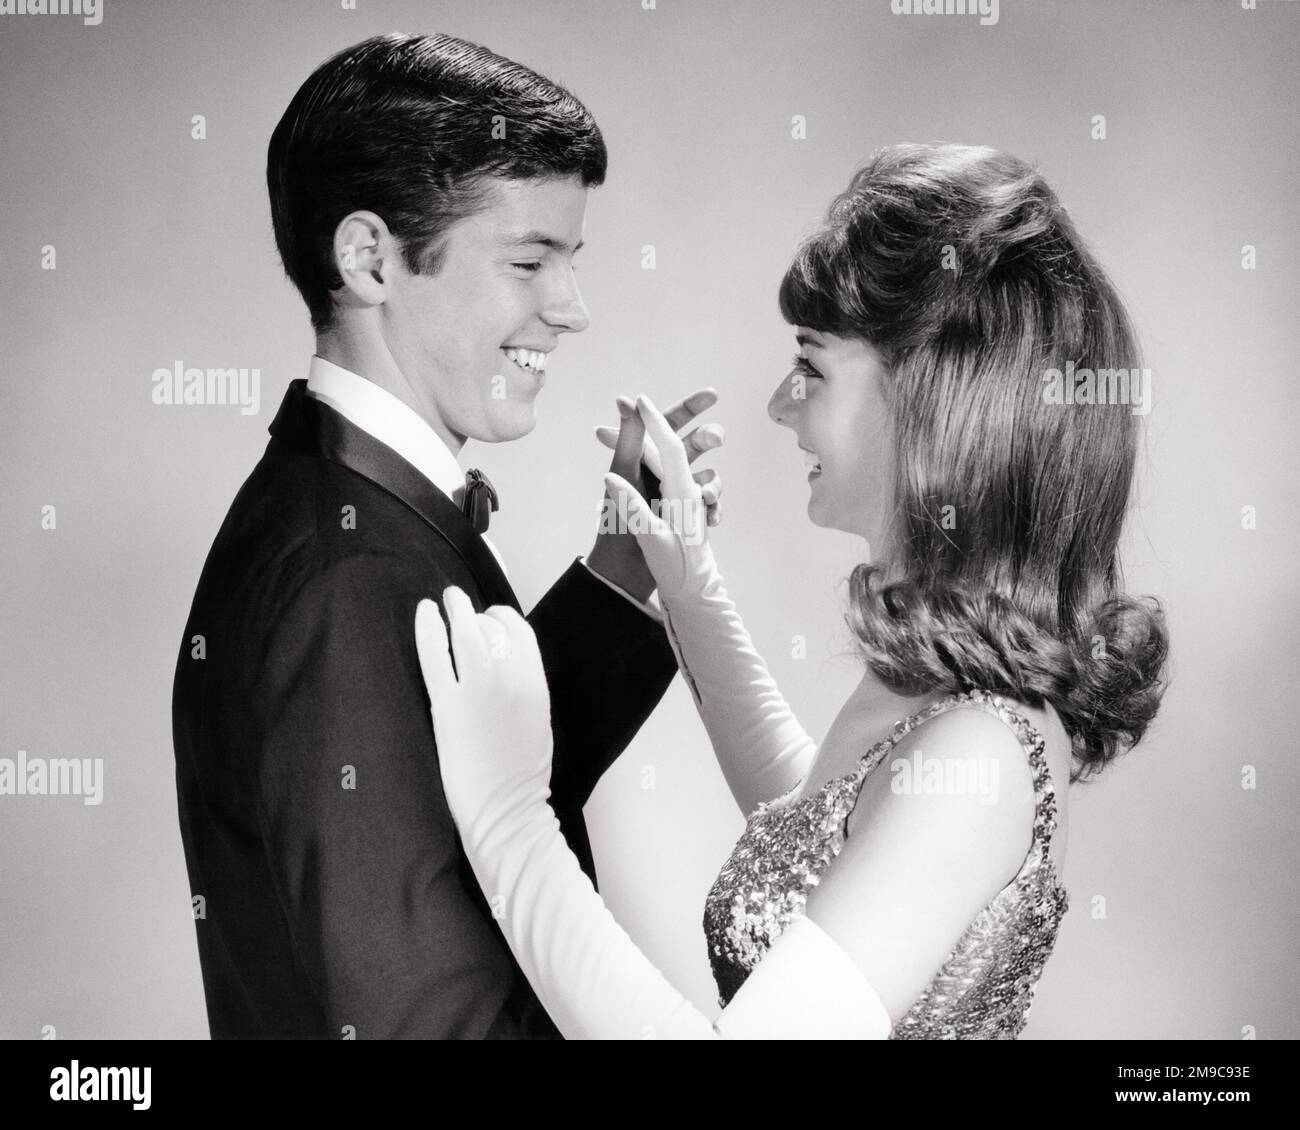 1960s TEEN COUPLE FORMAL ATTIRE DANCING ARM IN ARM AT SCHOOL PROM  - d5536 HAR001 HARS STYLE YOUNG ADULT TEAMWORK PLEASED JOY LIFESTYLE CELEBRATION FEMALES STUDIO SHOT HEALTHINESS COPY SPACE FRIENDSHIP HALF-LENGTH PERSONS MALES TEENAGE GIRL TEENAGE BOY ENTERTAINMENT CONFIDENCE B&W DATING SCHOOLS TUX HAPPINESS CHEERFUL ARM IN ARM HAIRSTYLE ATTRACTION HIGH SCHOOL SMILES HIGH SCHOOLS CONNECTION COURTSHIP JOYFUL STYLISH TEENAGED ATTIRE SEQUINS COOPERATION JUVENILES LONG WHITE GLOVES SOCIAL ACTIVITY TOGETHERNESS YOUNG ADULT MAN YOUNG ADULT WOMAN BIG HAIR BLACK AND WHITE CAUCASIAN ETHNICITY COURTING Stock Photo